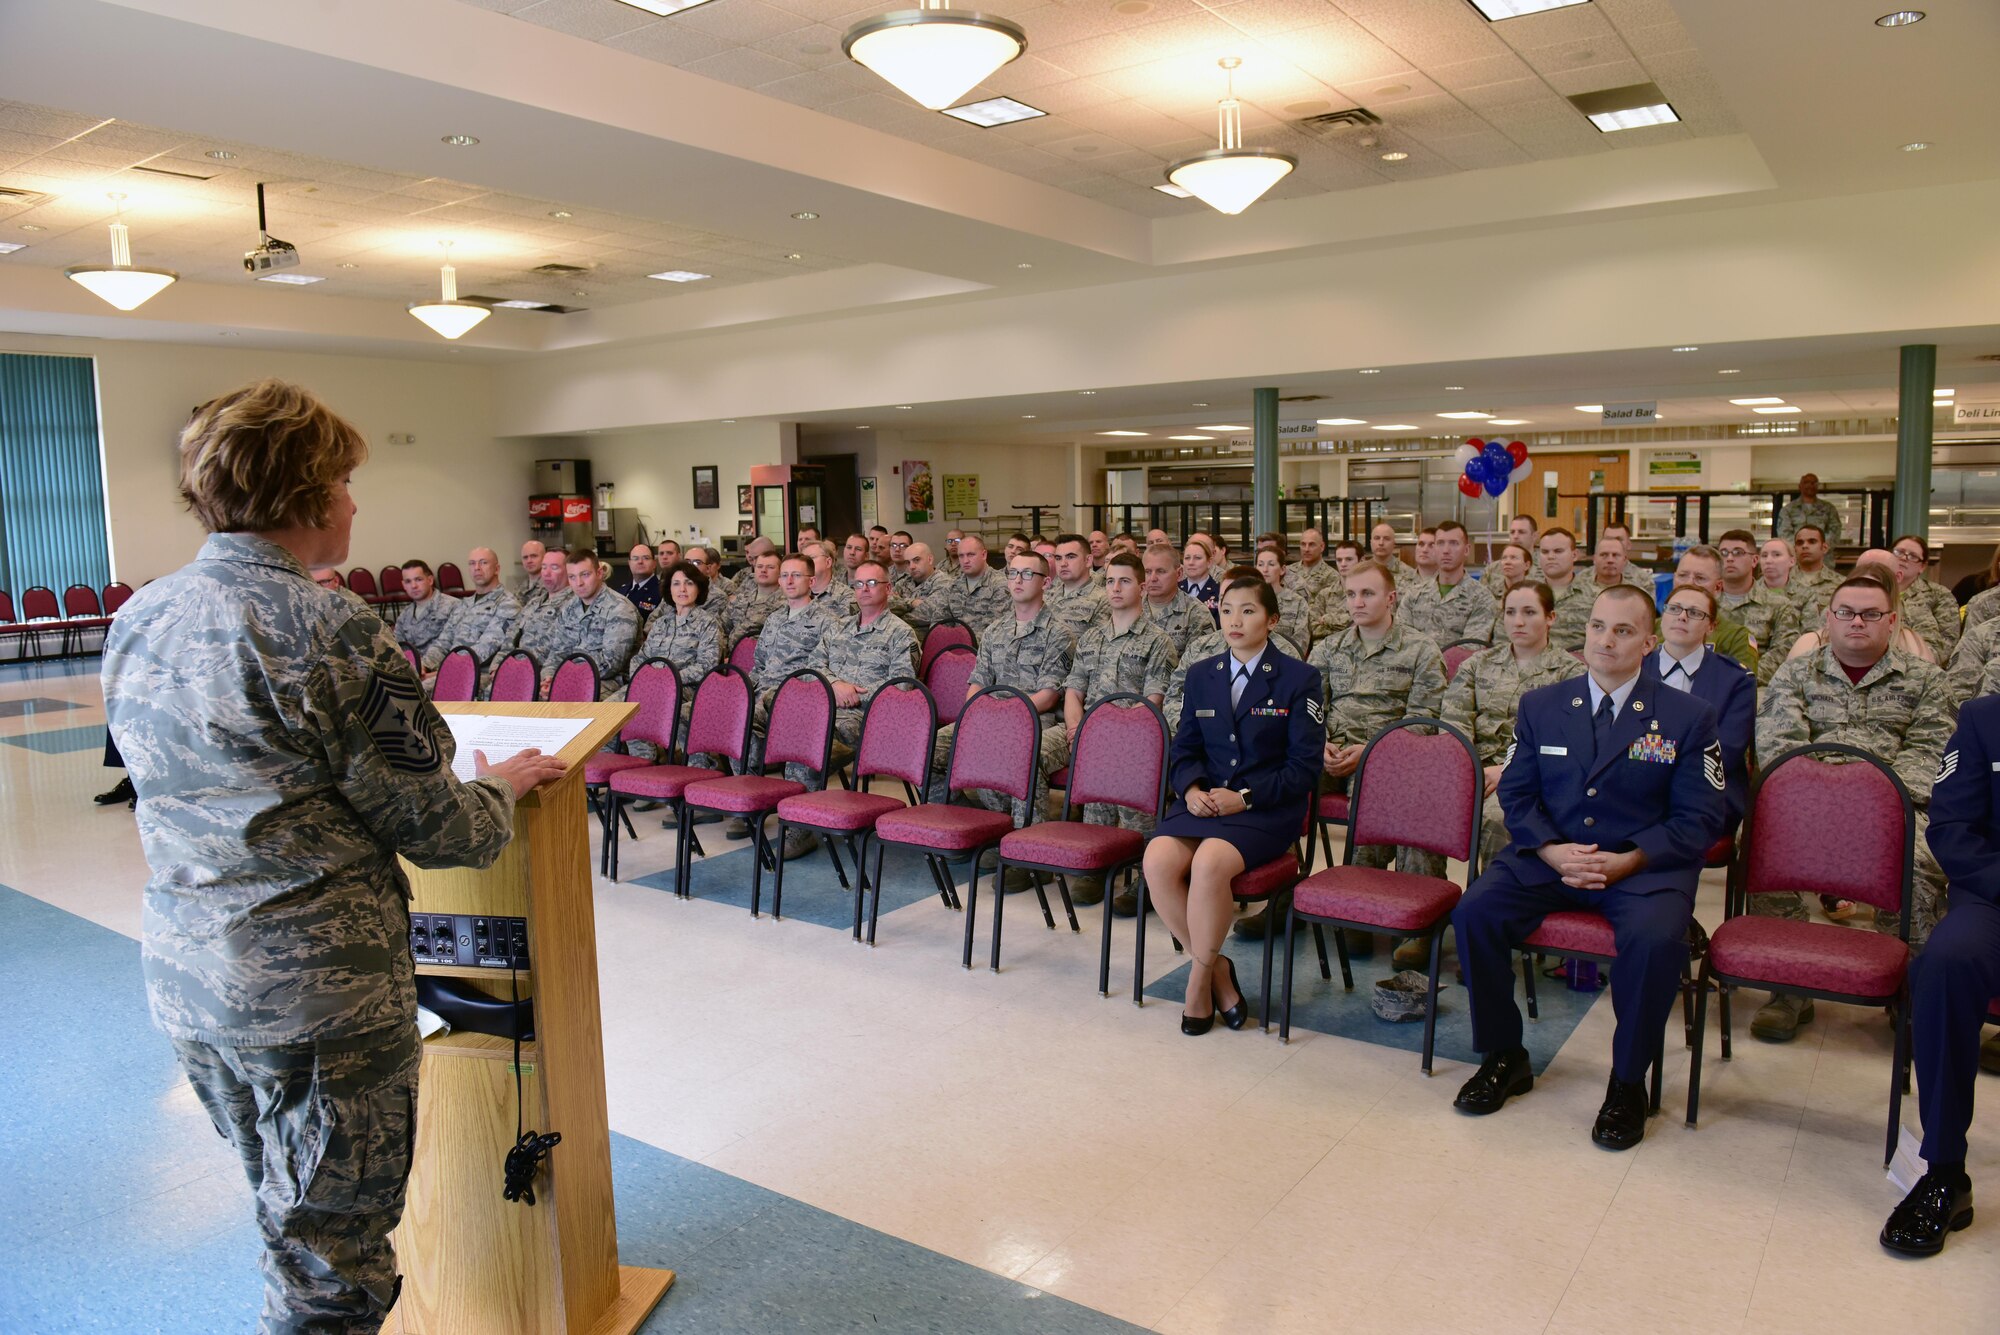 New York Air National Guard Command Chief Master Sgt. Amy Giaquinto addresses attendees of the first Non-Commissioned Officer induction ceremony held at Stratton Air National Guard Base, Scotia, New York on June 3, 2017.  The induction ceremony recognizes Airmen who were promoted to staff sergeant between May 1, 2016 and May 15, 2017. More than 30 Airmen were recognized during the ceremony. (U.S. Air National Guard photo by Staff Sgt. Benjamin German/Released)